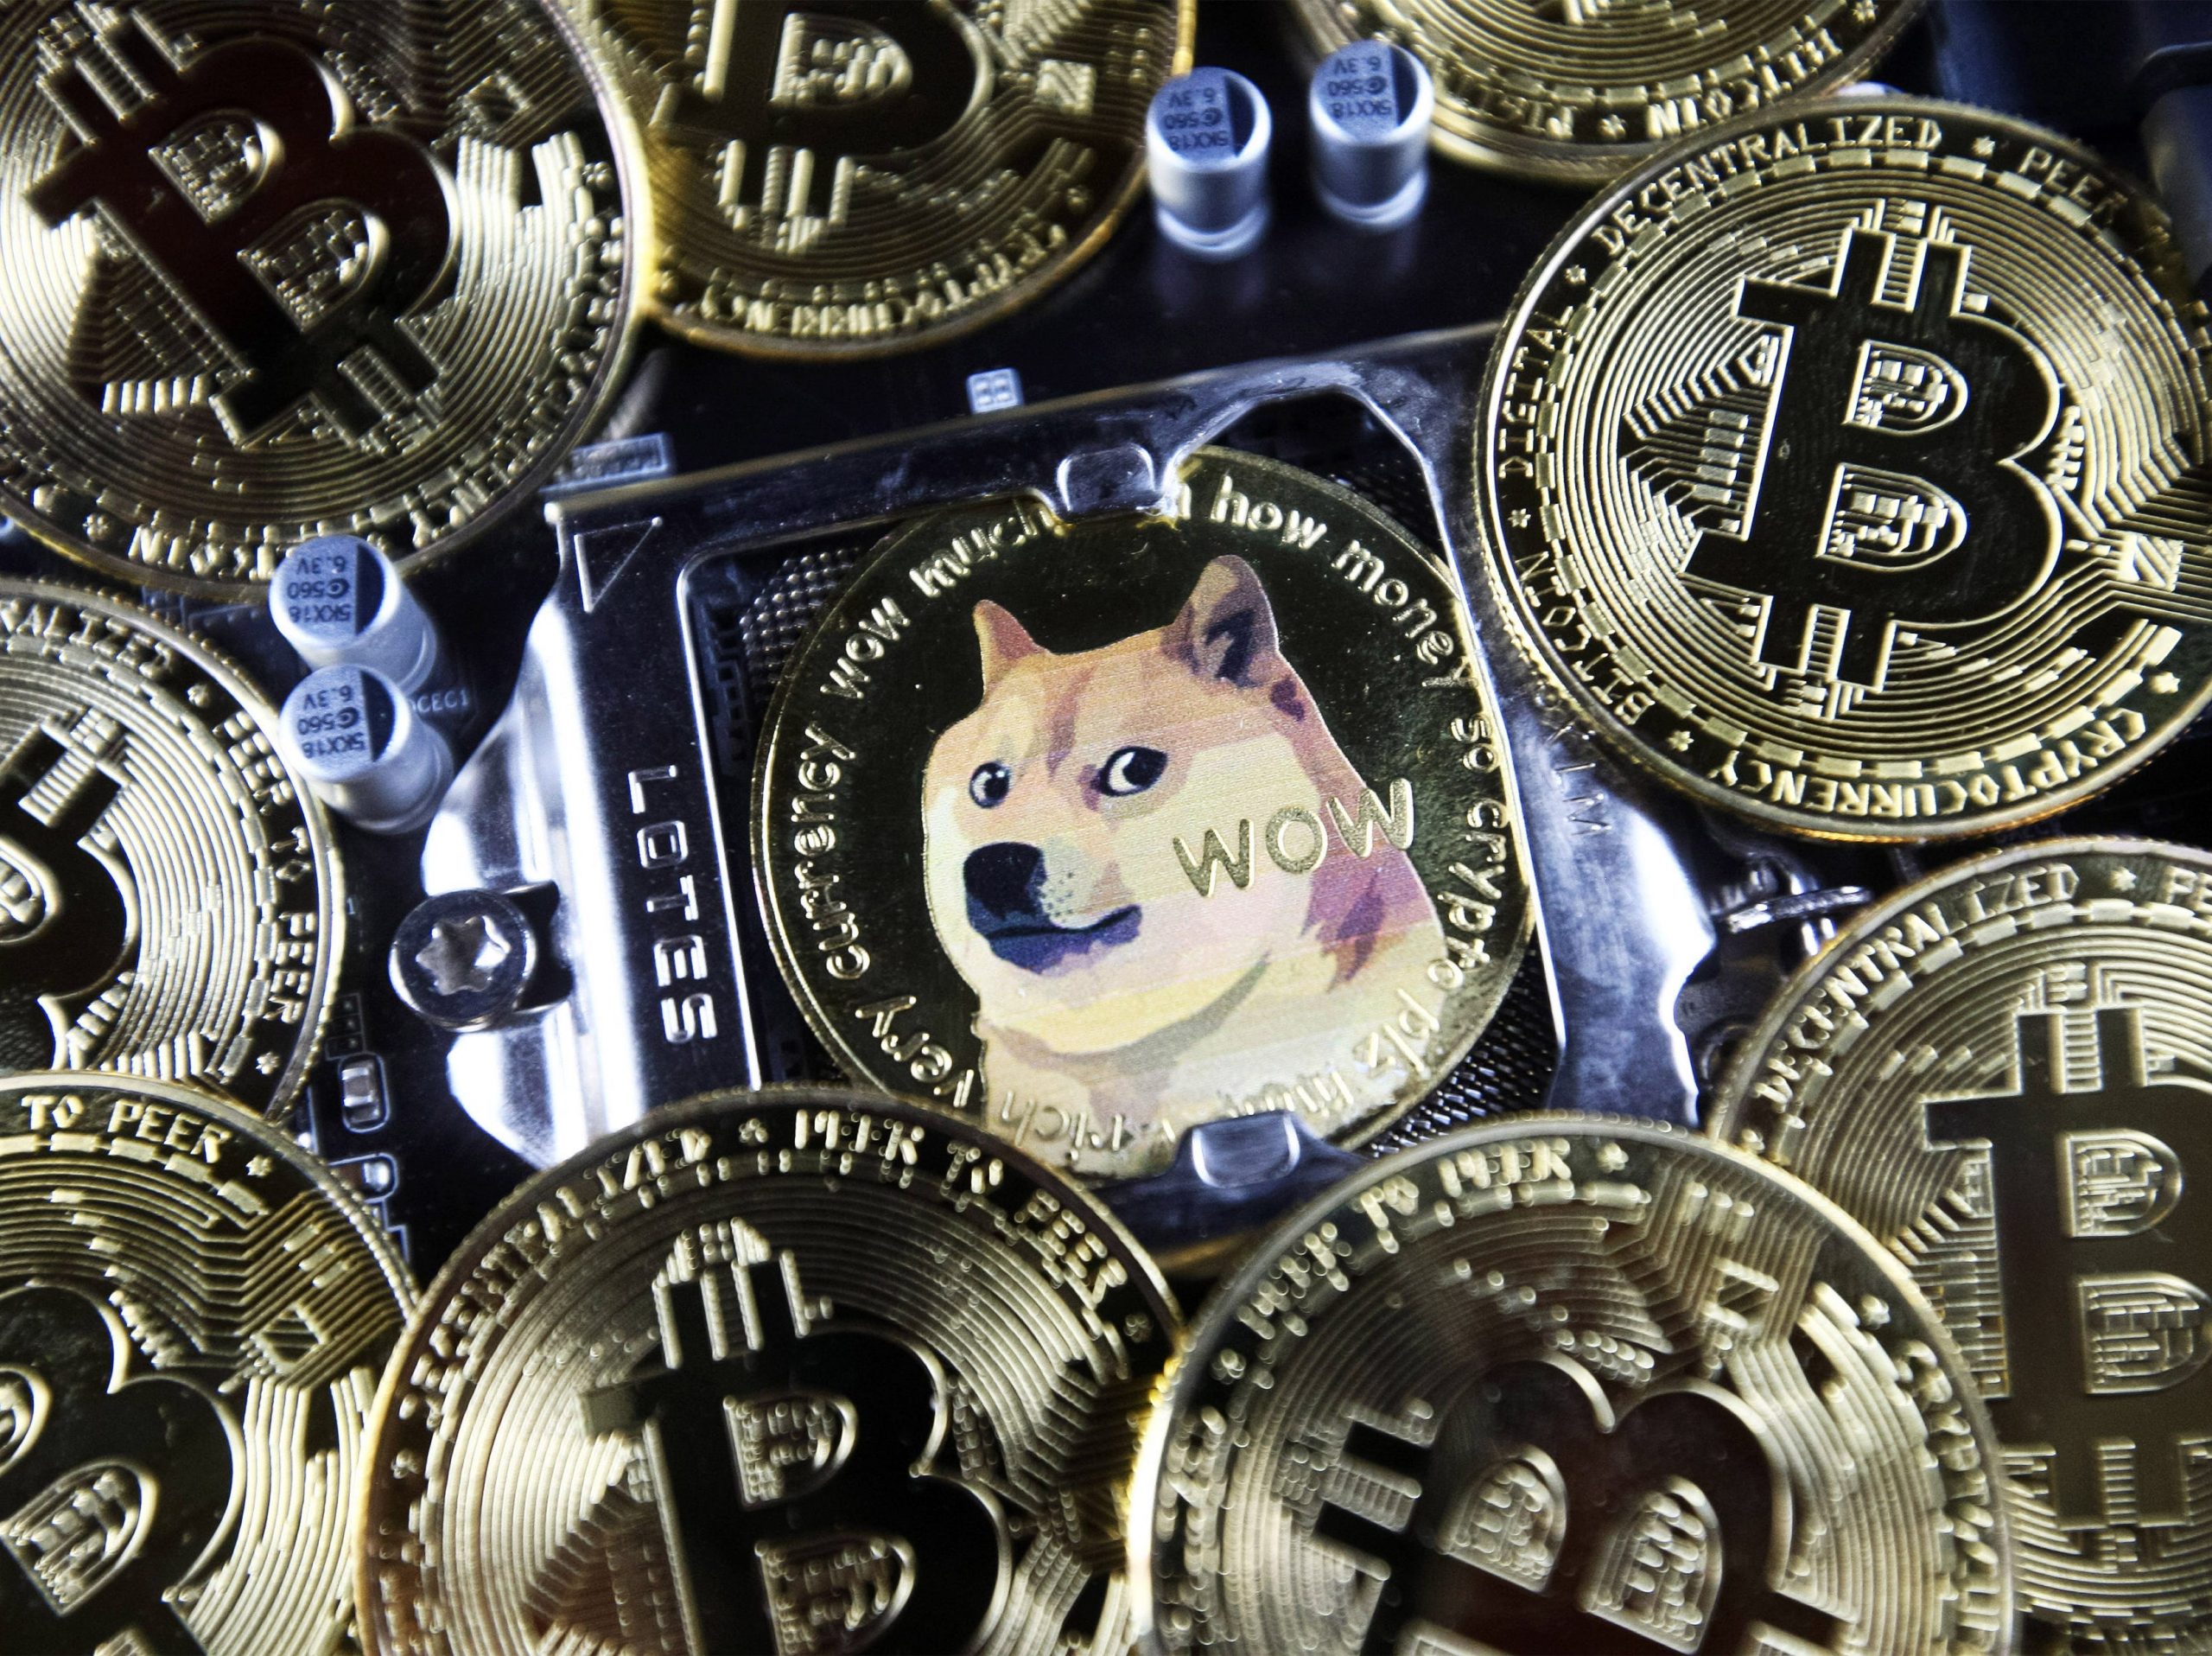 Dogecoin and Bitcoin cryptocurrency coins are pictured in Kyiv on 08 July, 2021.